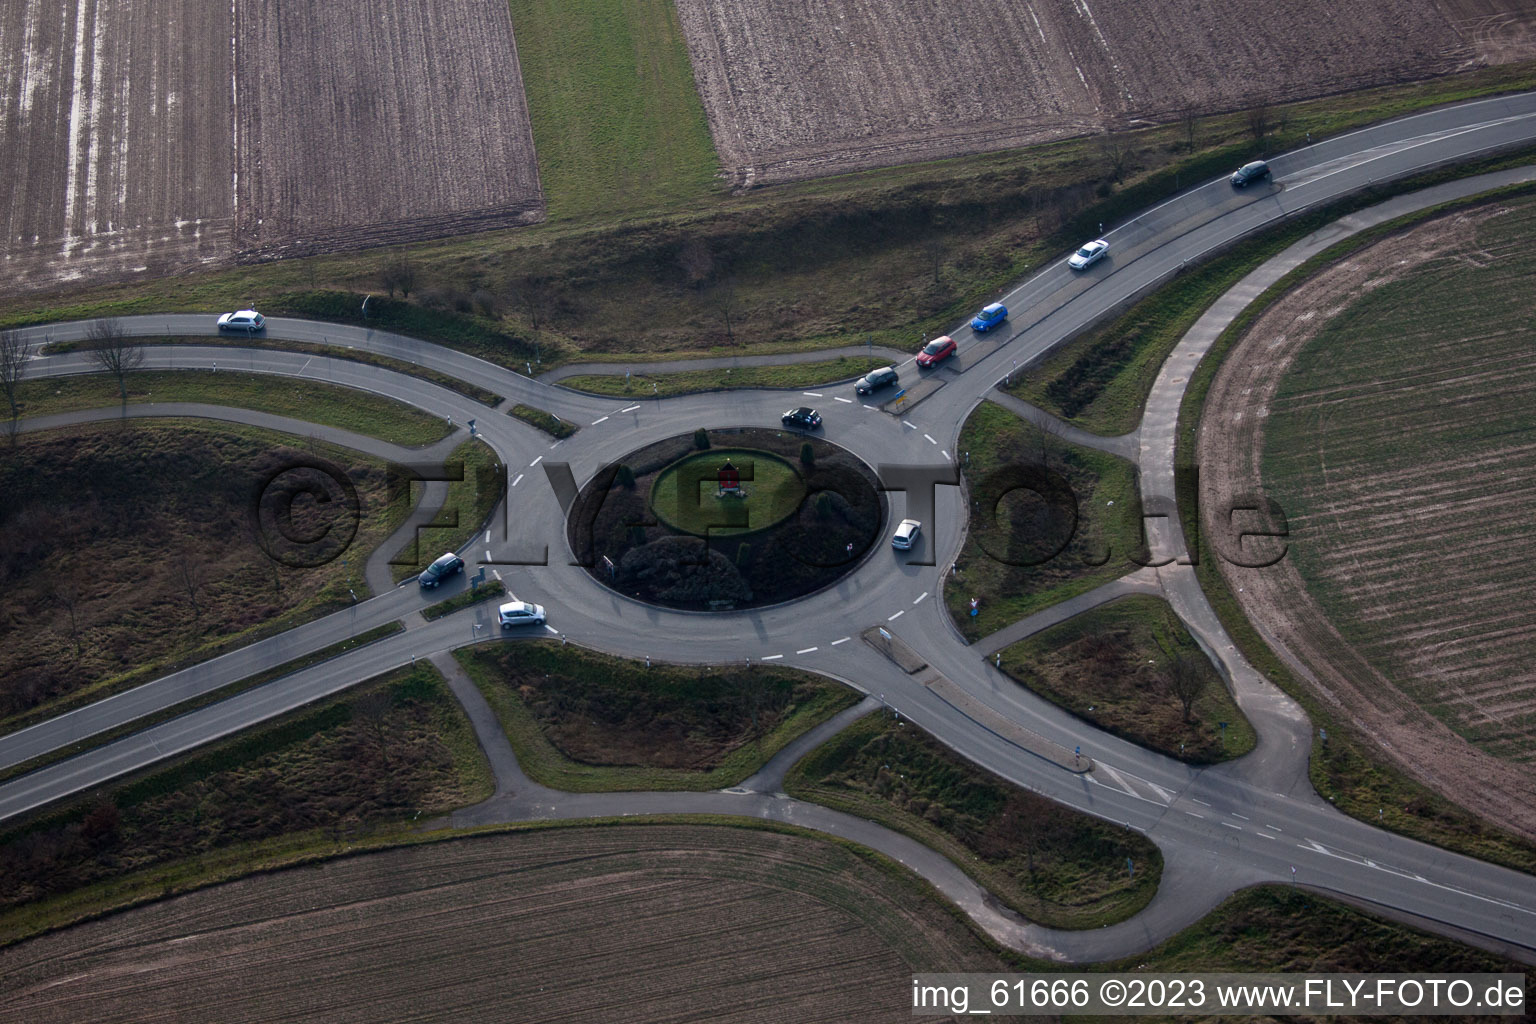 LD-Mörlheim, roundabout in Offenbach an der Queich in the state Rhineland-Palatinate, Germany